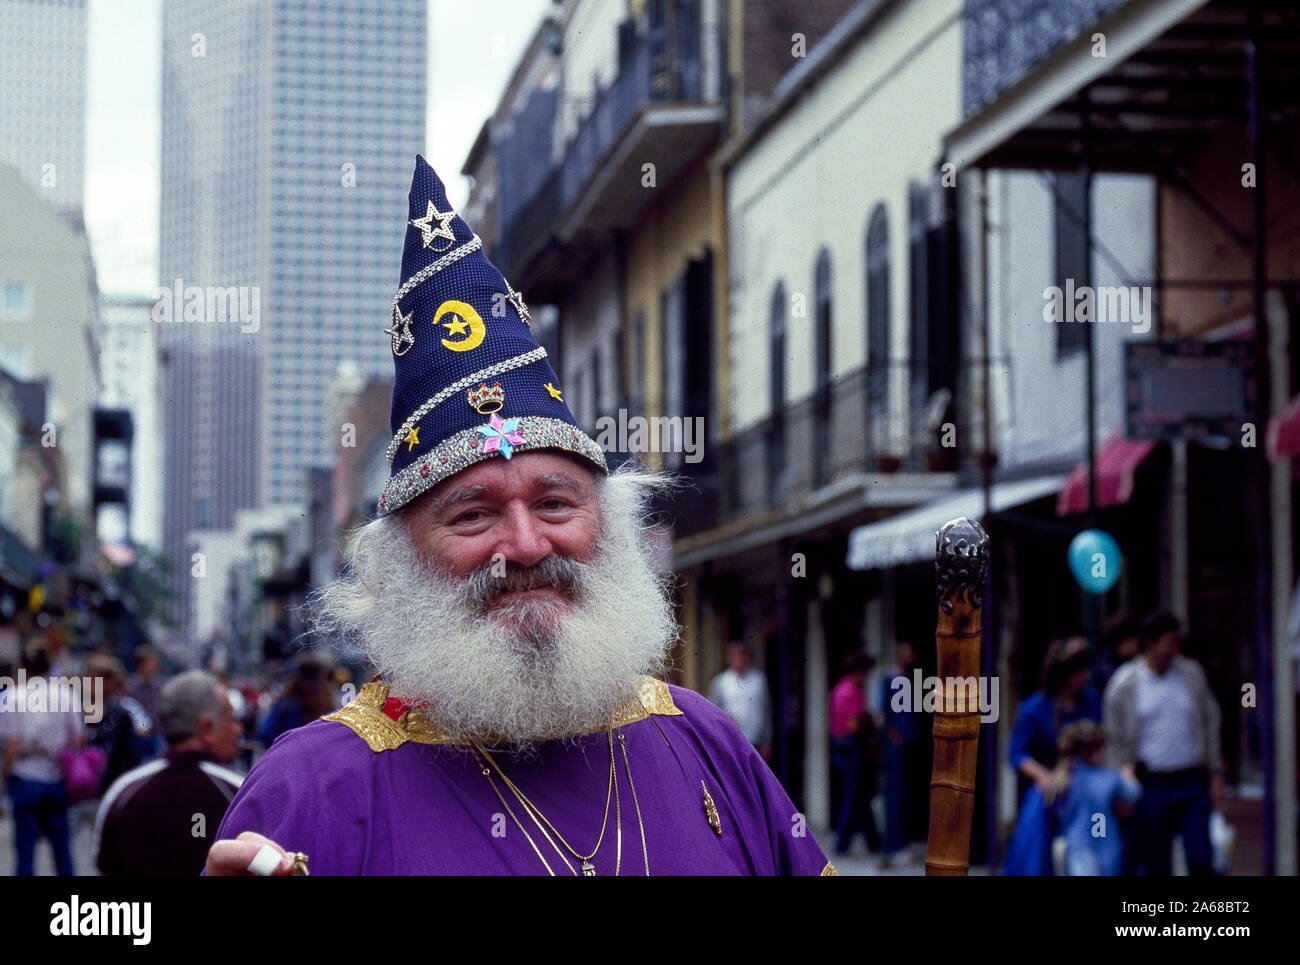 Wizard and his Wishing Well on Bourbon Street, New Orleans, Louisiana Note: Despite the title, the view is clearly Royal Street (not Bourbon 1 block away). Shown is streetcape at the 600 block or Royal, photo taken at or near intersection with St. Peter Street, looking upriver towards Canal Street Stock Photo